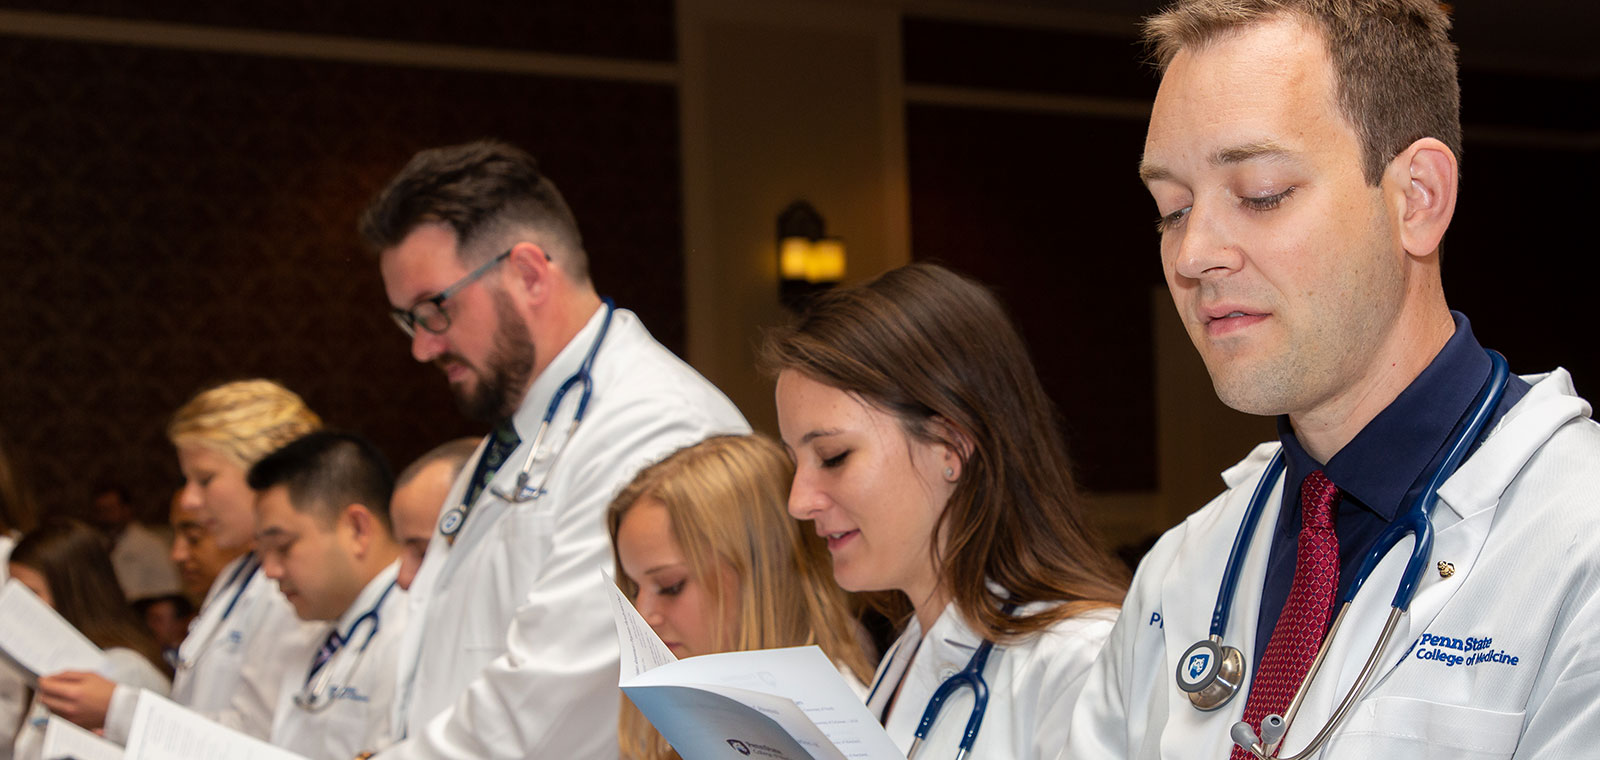 Students in the Physician Assistant Program at Penn State College of Medicine take part in the White Coat Ceremony in 2016, during which the students receive their white coats signifying the start of their training. Three female students are seen in the foreground, reading from the event program, with a male and female student visible in the background.